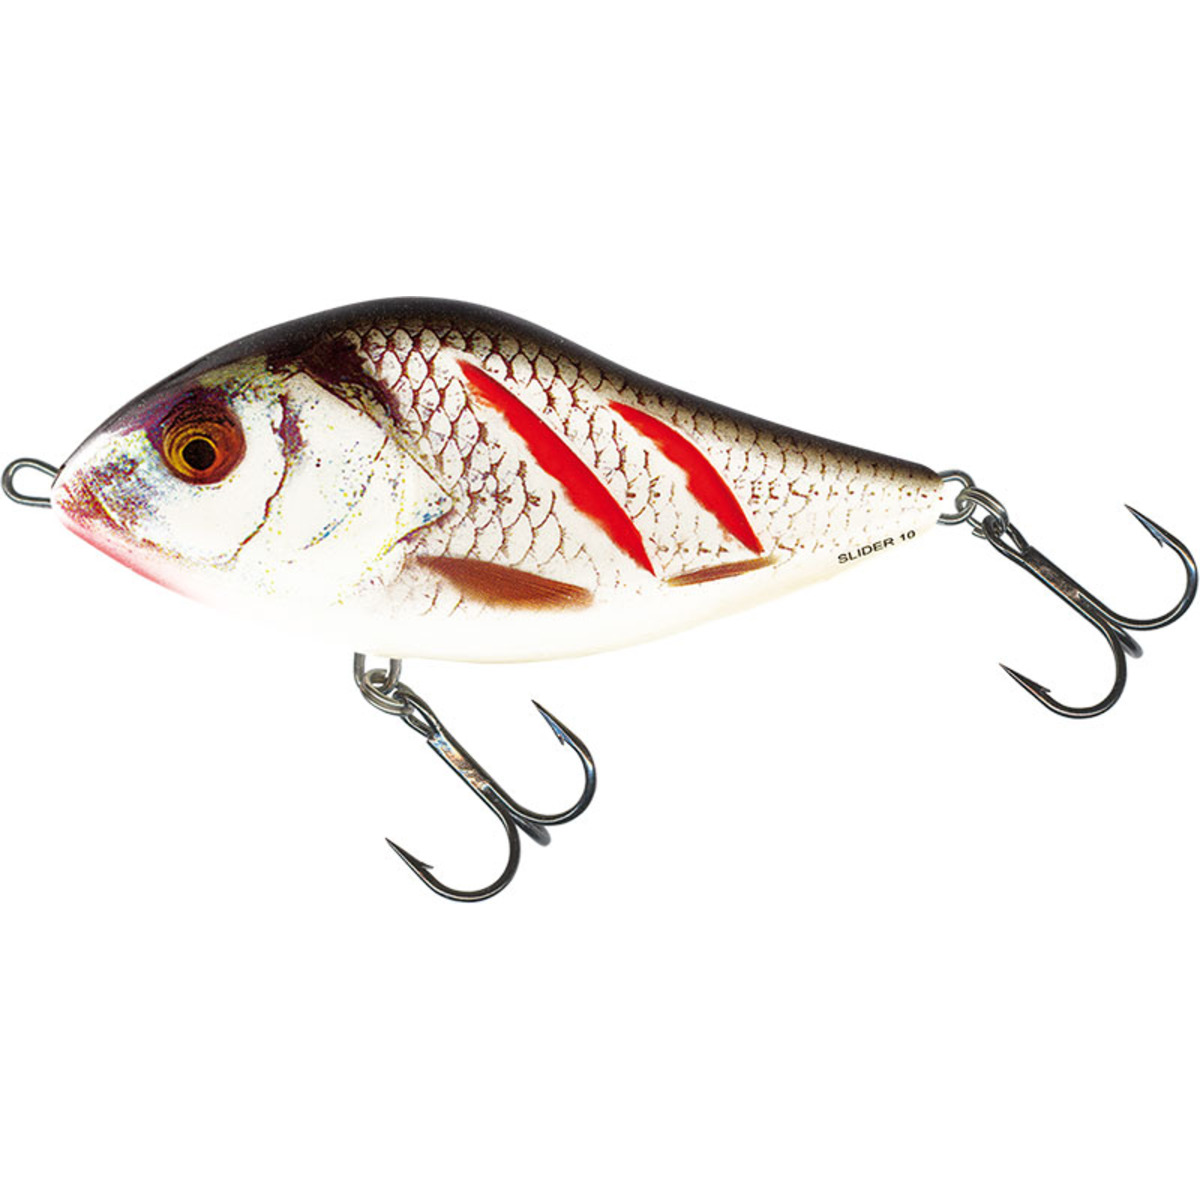 Salmo Slider Sinking - 6 Cm - Wounded Real Grey Shiner